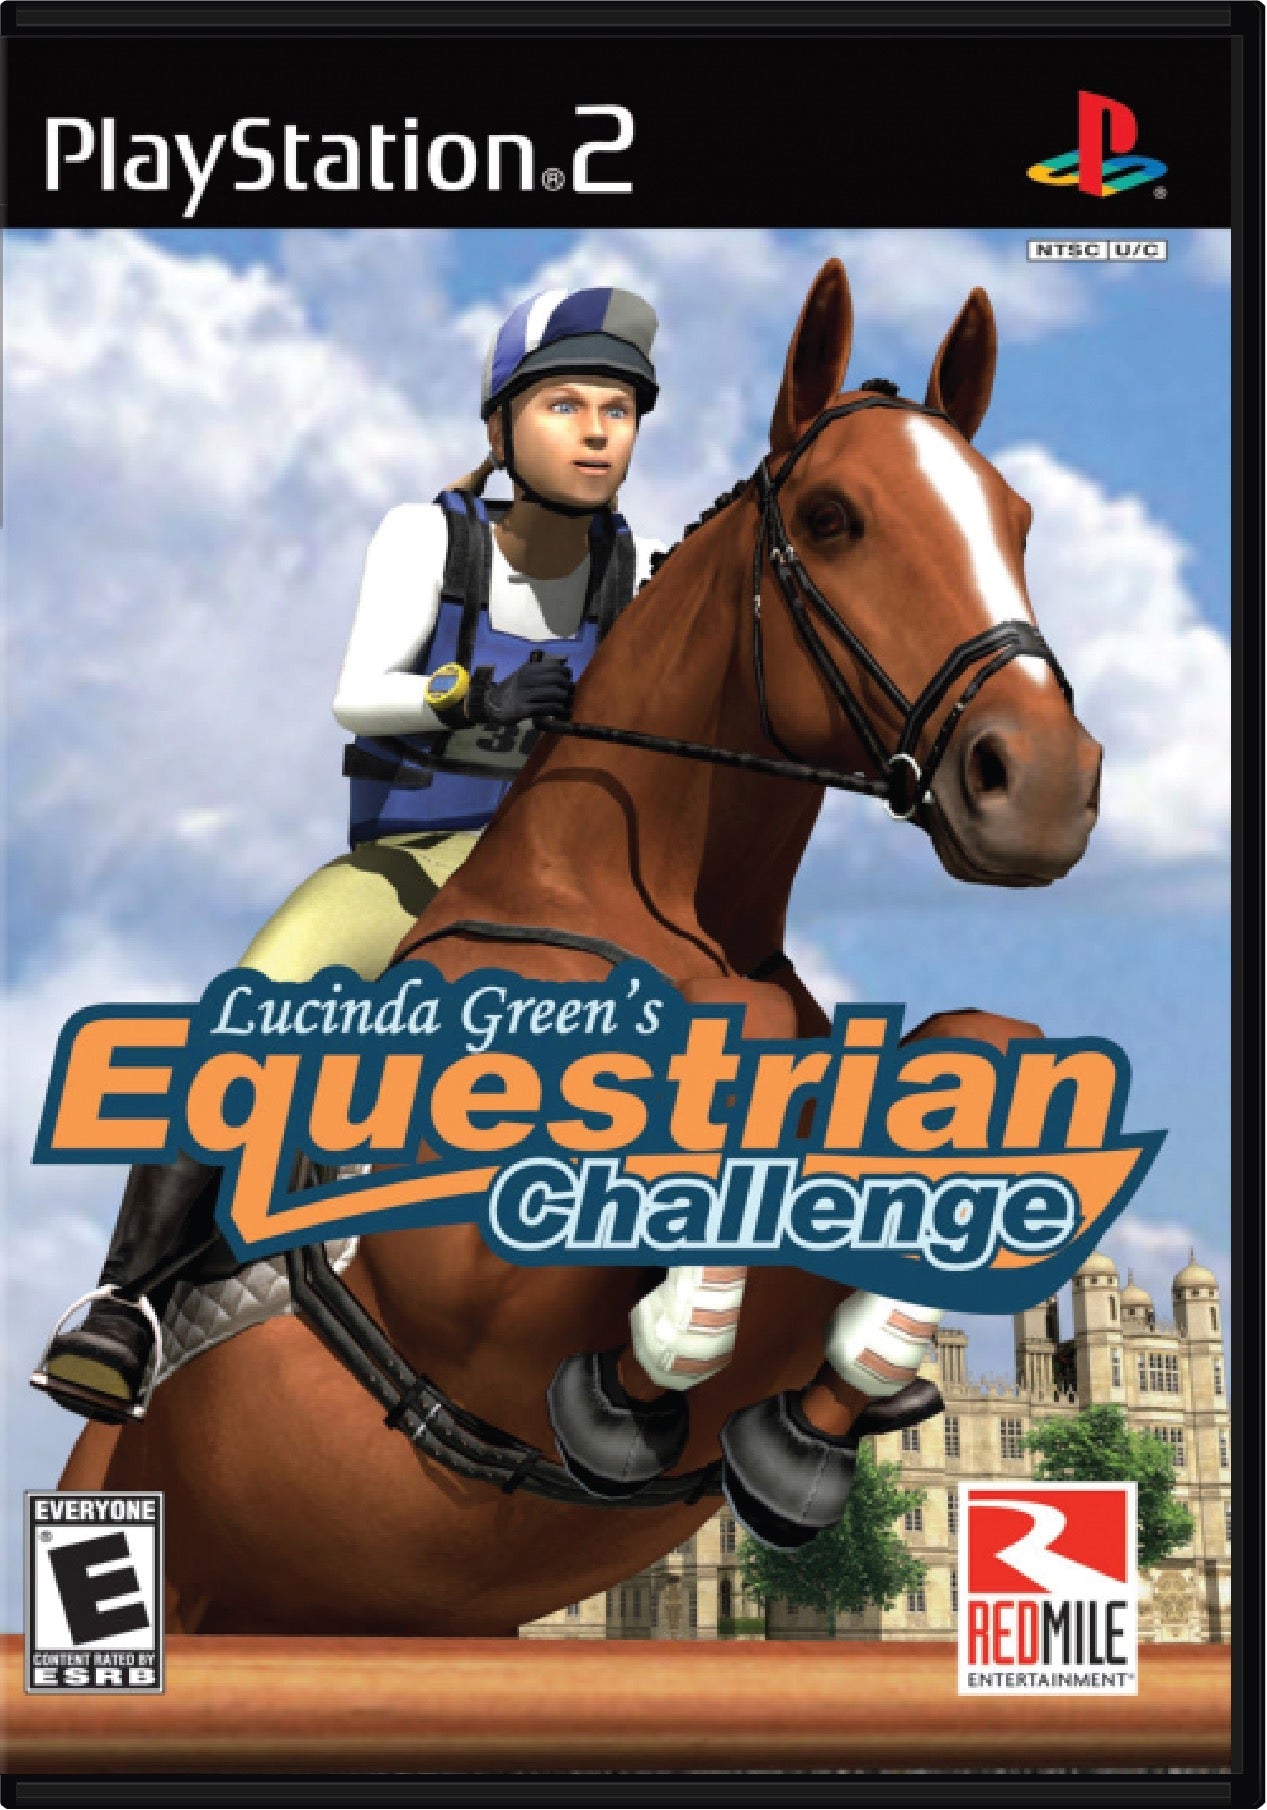 Lucinda Green's Equestrian Challenge Cover Art and Product Photo